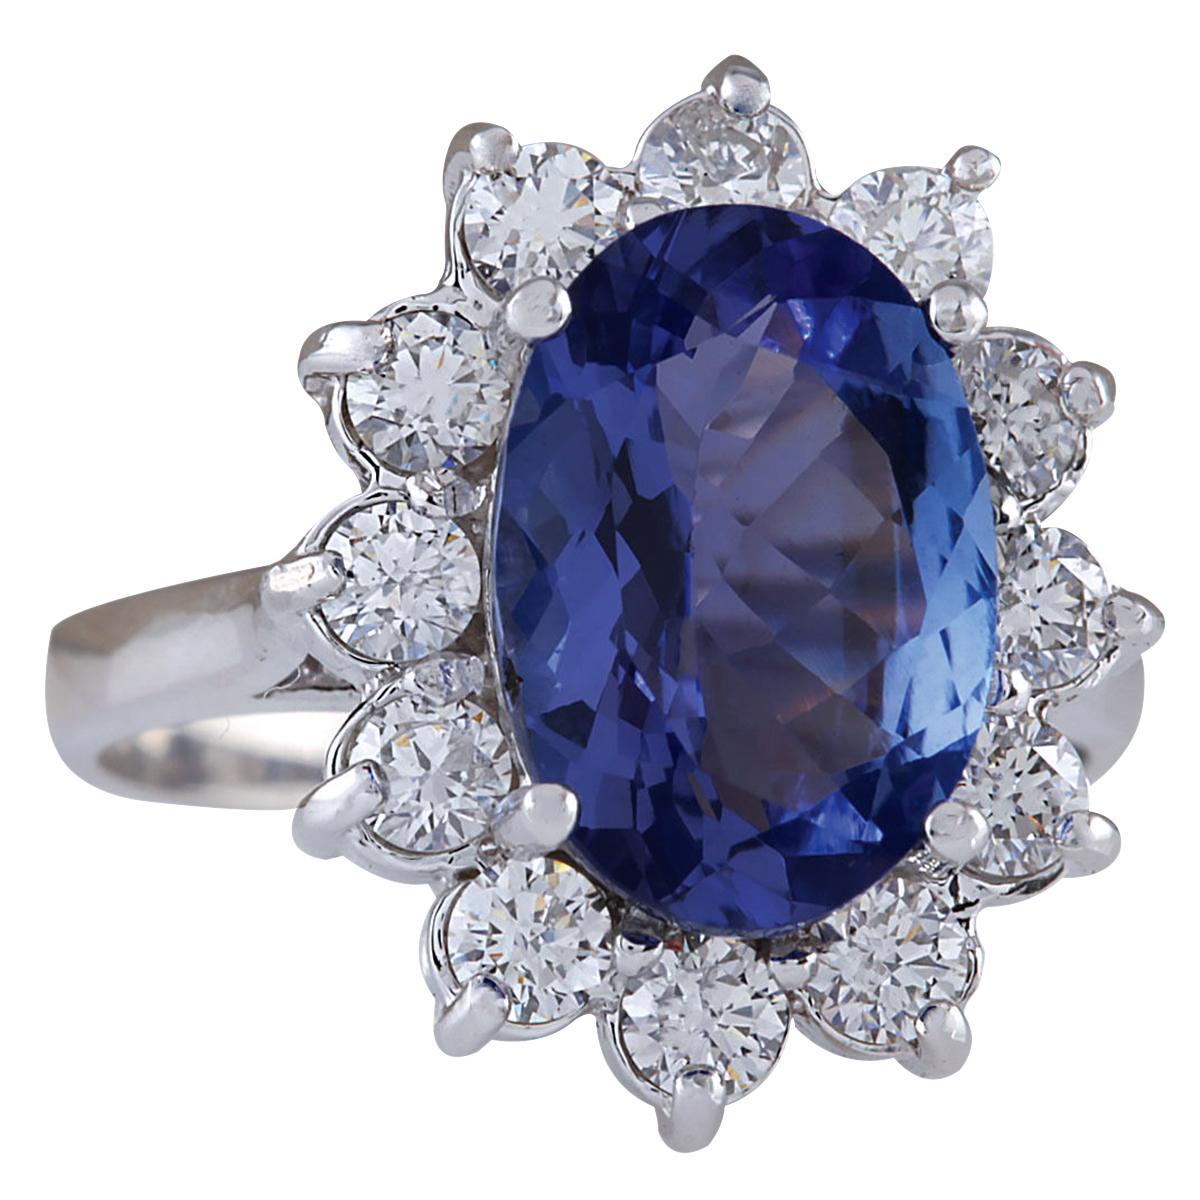 Stamped: 14K White Gold
Total Ring Weight: 6.0 Grams
Total Natural Tanzanite Weight is 3.74 Carat (Measures: 12.00x10.00 mm)
Color: Blue
Total Natural Diamond Weight is 1.00 Carat
Color: F-G, Clarity: VS2-SI1
Face Measures: 18.50x15.35 mm
Sku: